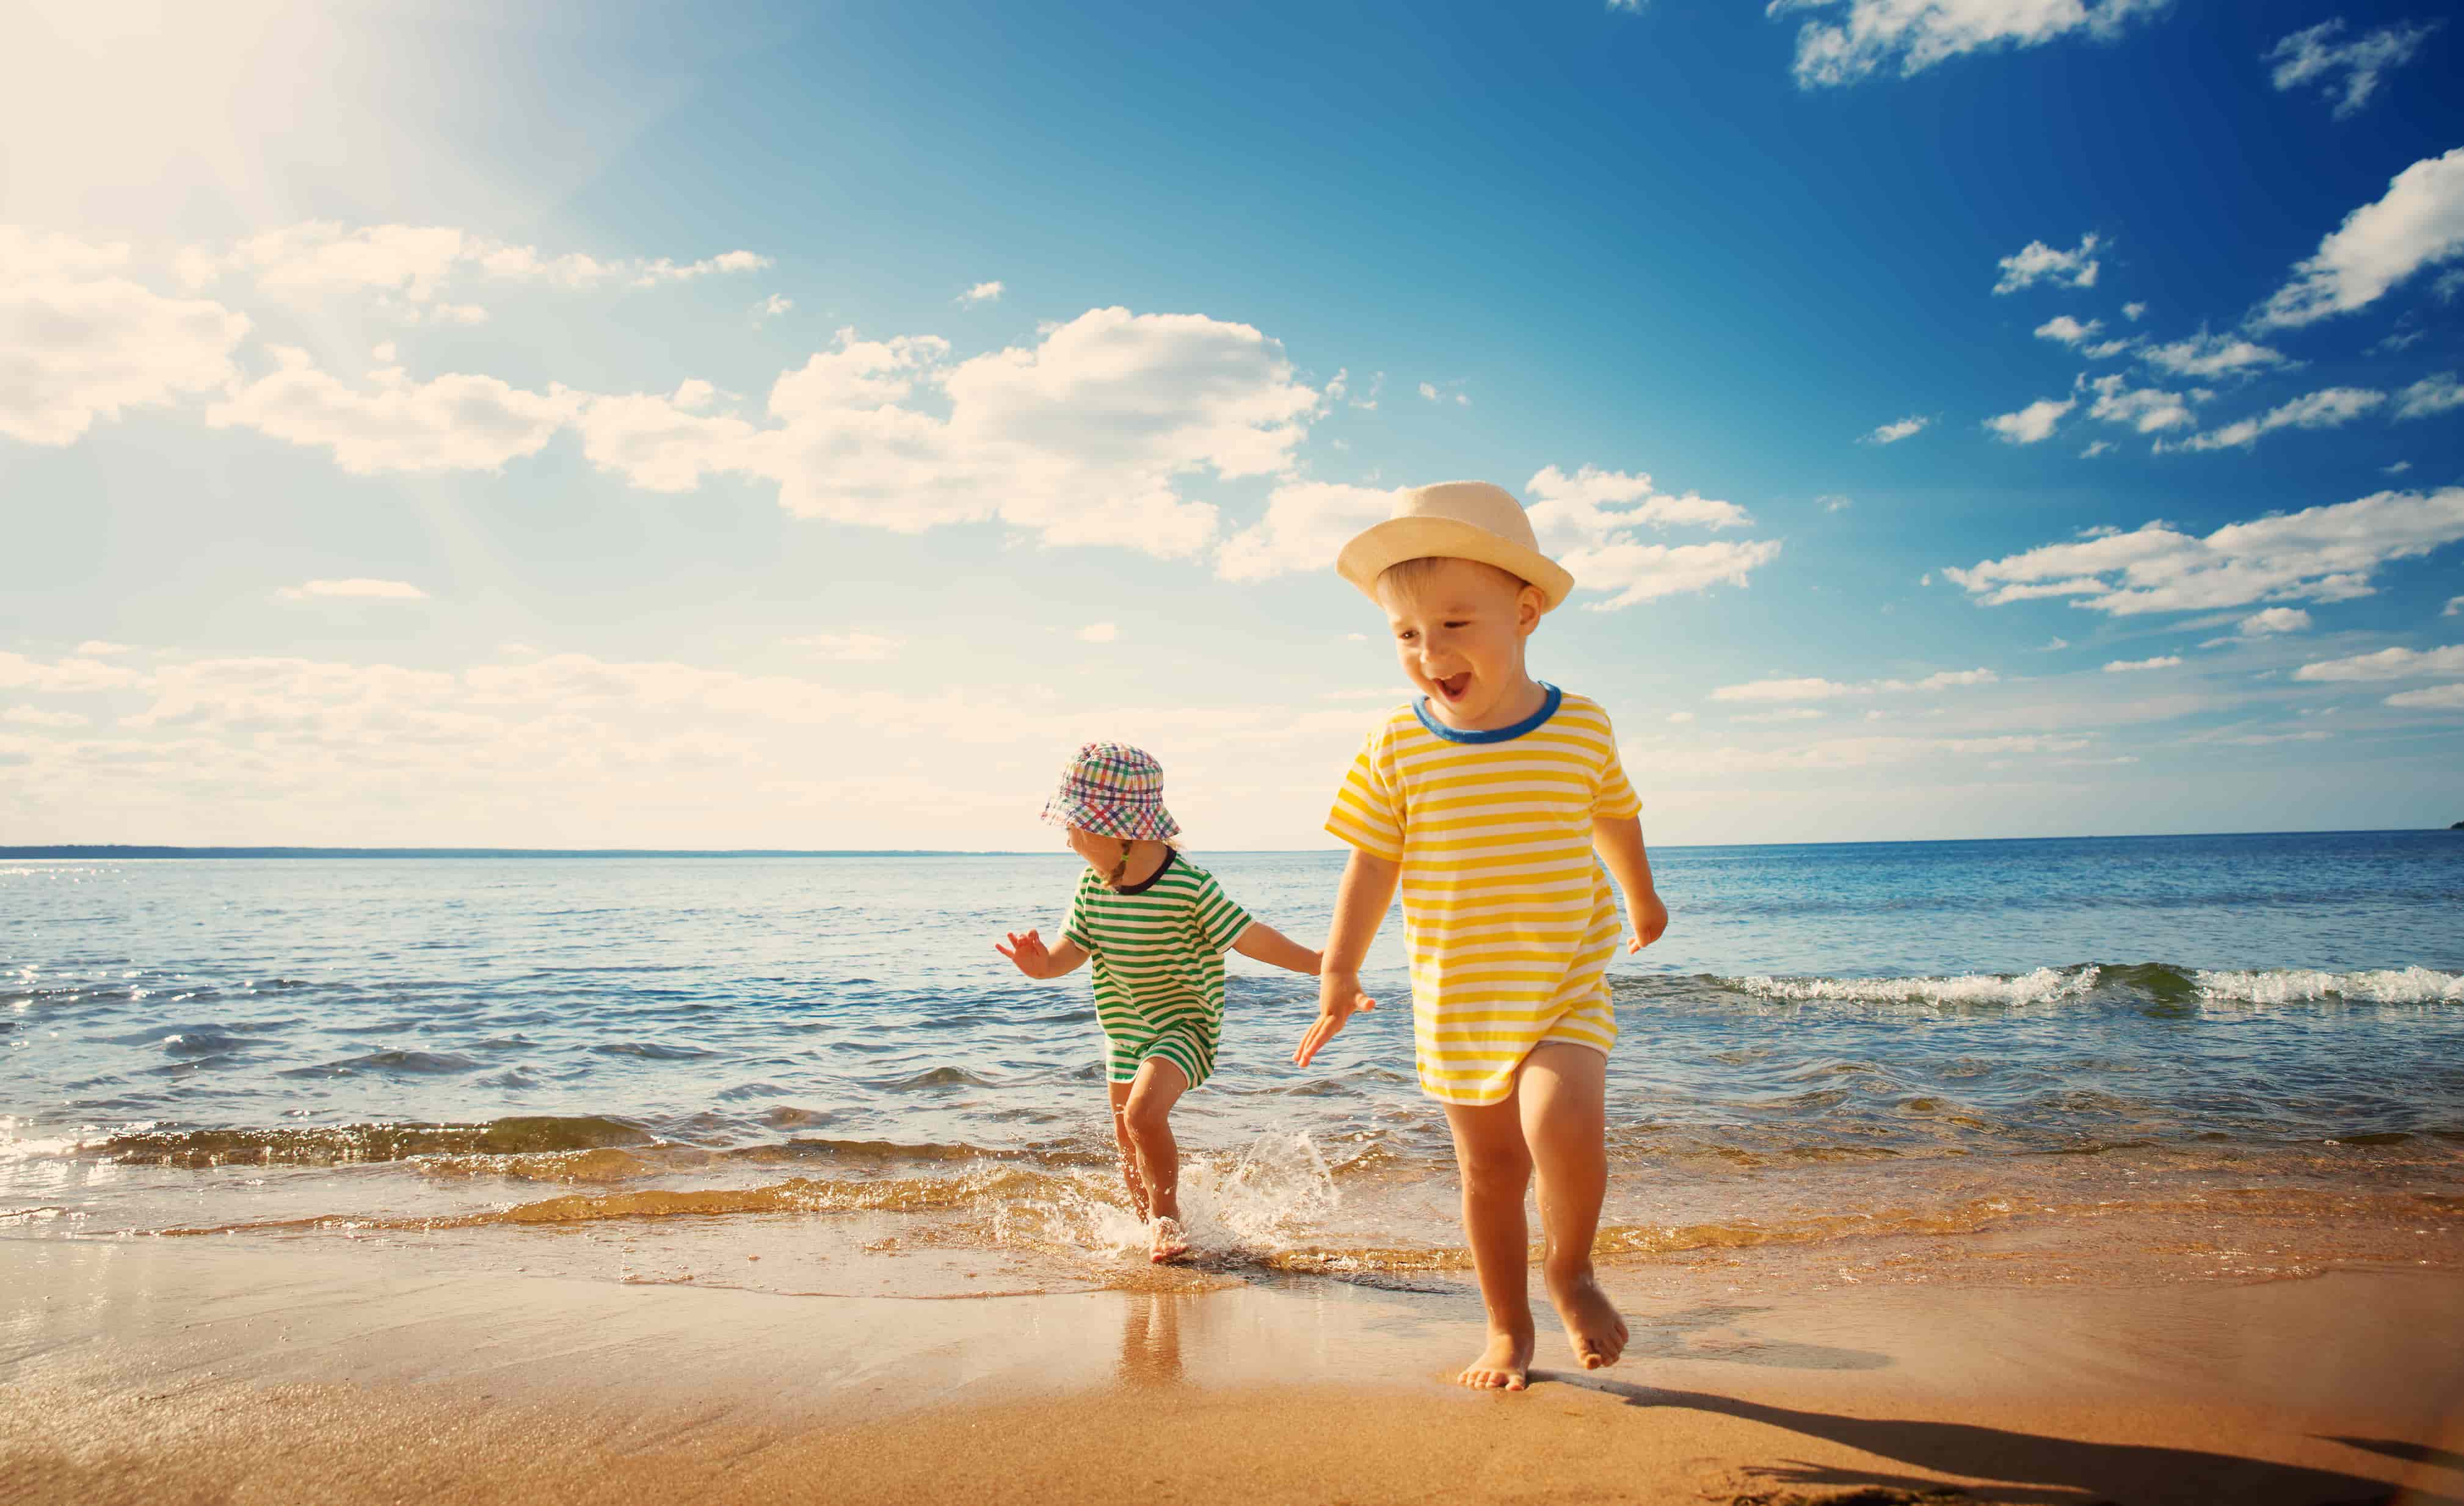 The 5 best beaches for children in Mallorca